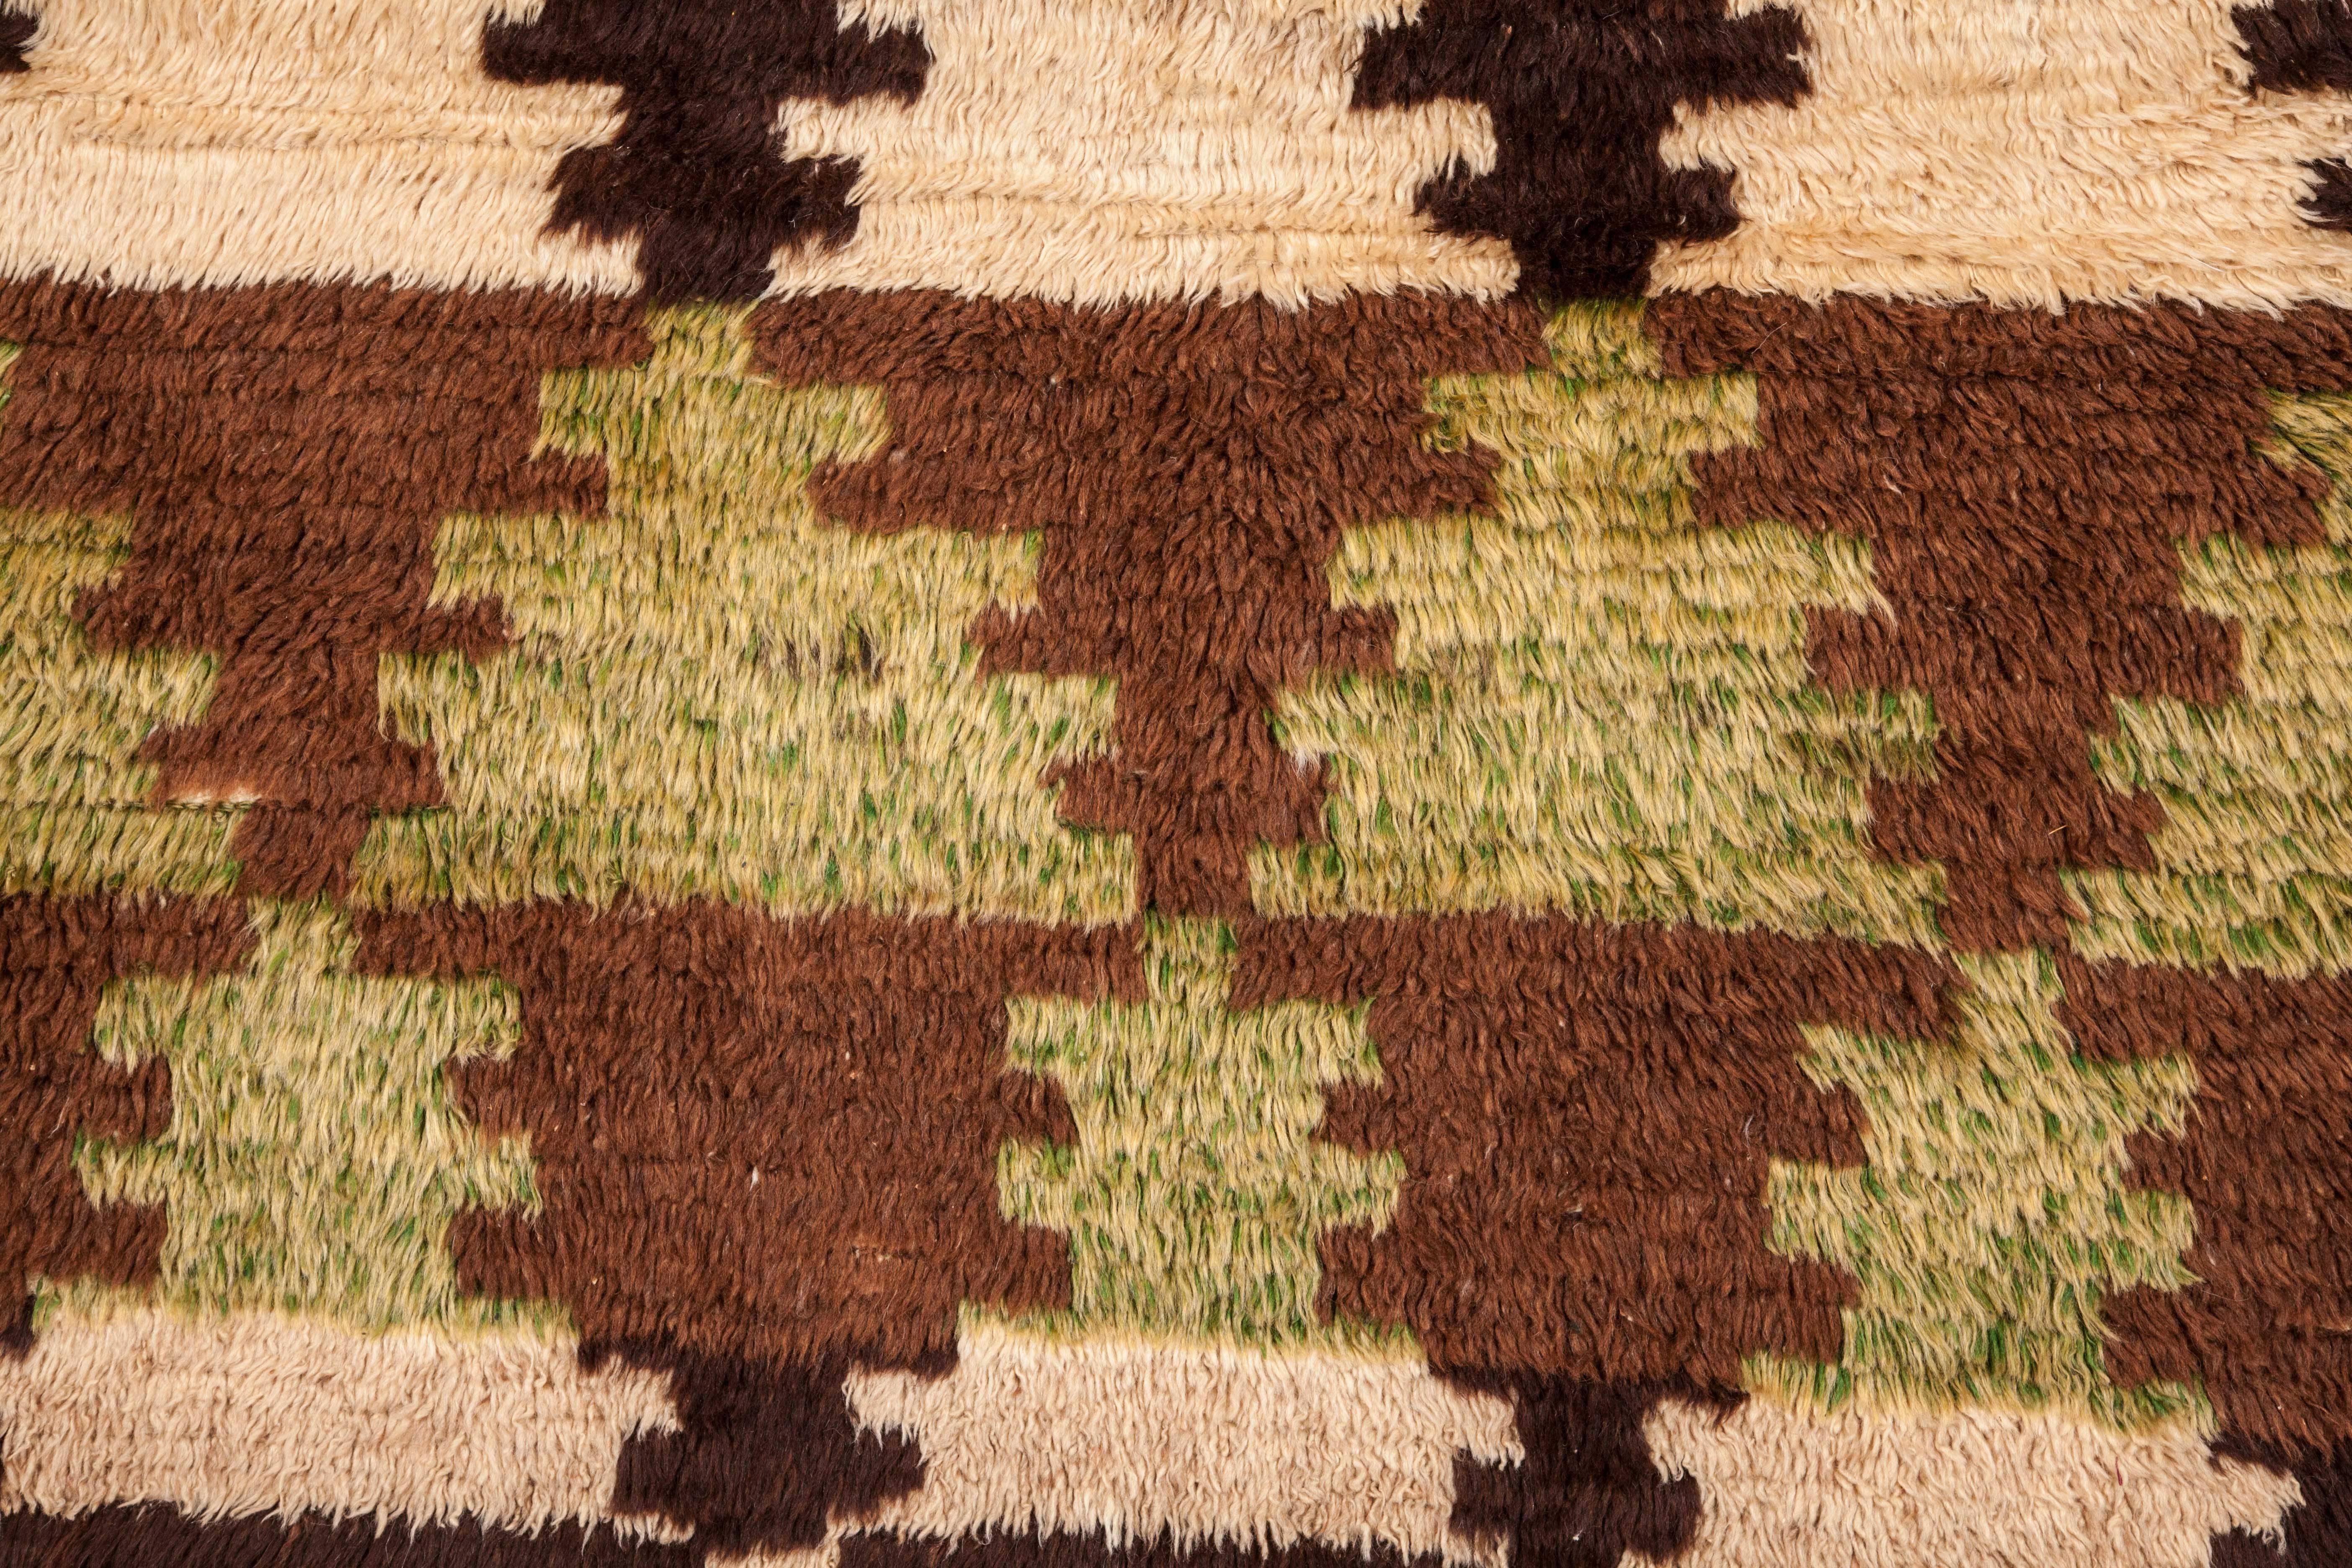 Tulu rugs are probably the most utilitarian rugs made by the nomads from Central Anatolia. They are mostly done naively and with un-dyed yarn. Occasionally, one will find some colors added such as reds, blues. The wool is of very good quality and